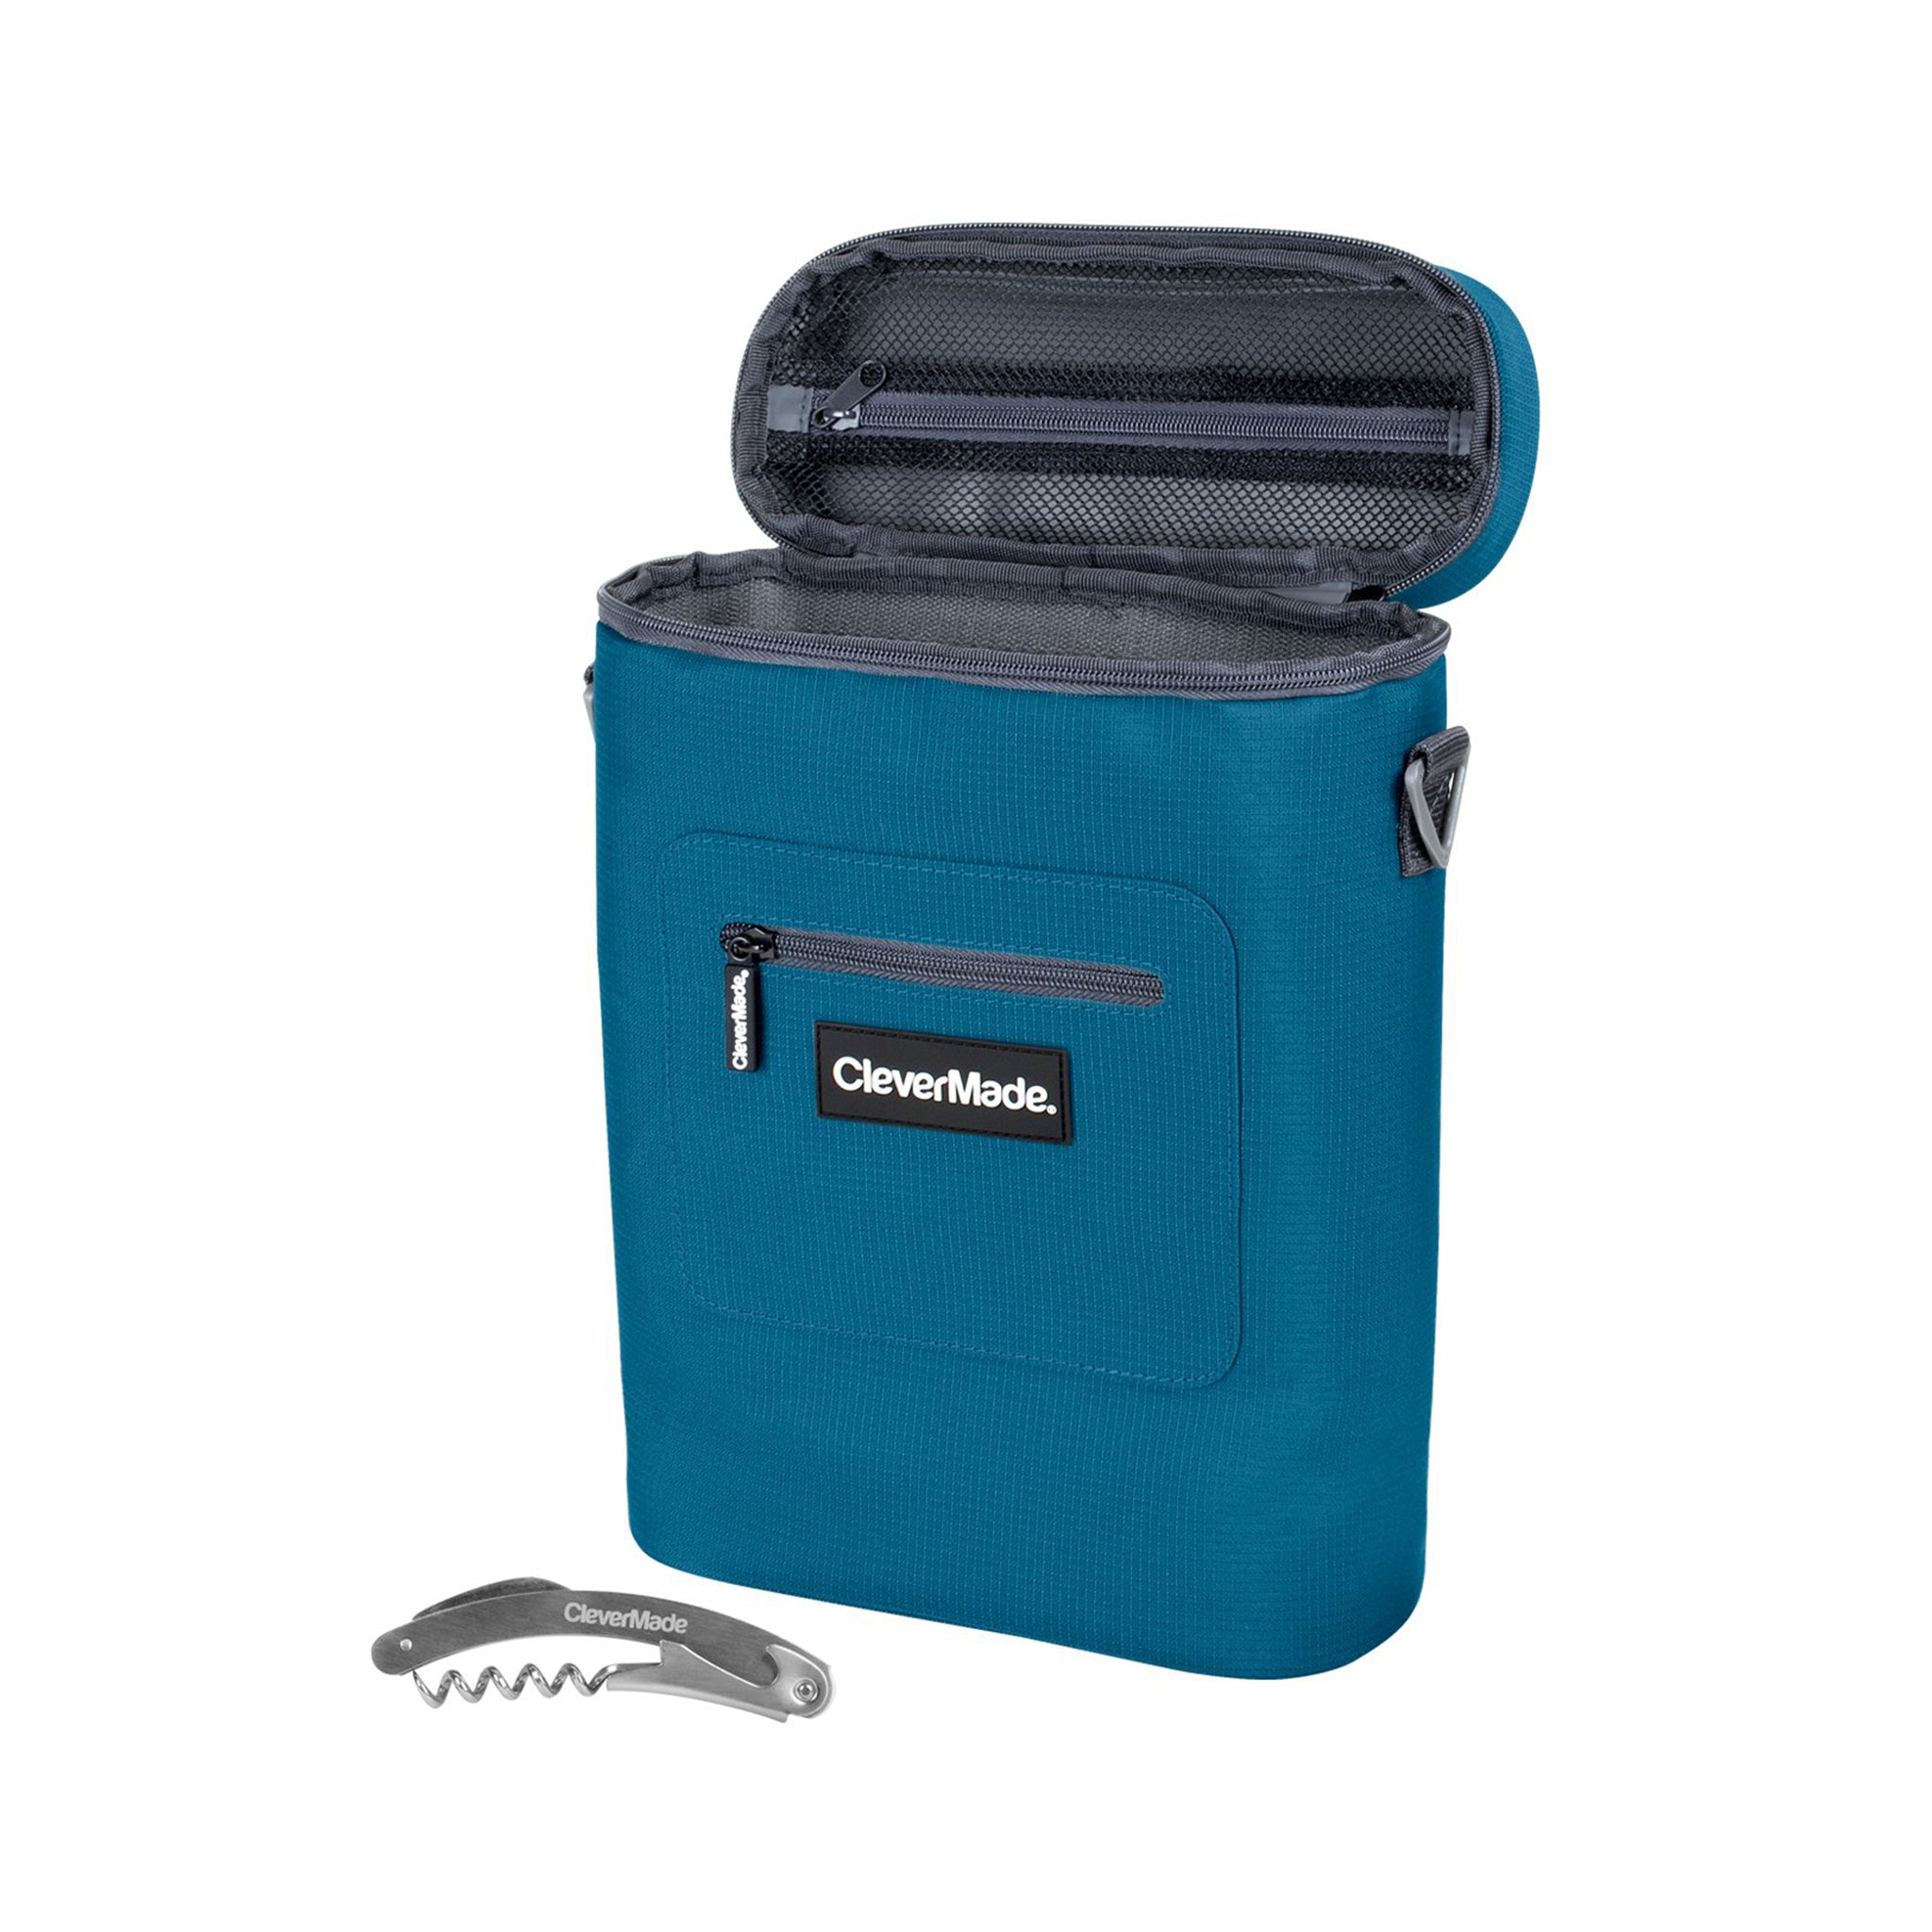 Clevermade Wine Cooler Insulated Cold Pack Wine Opener & Shoulder Strap Blue